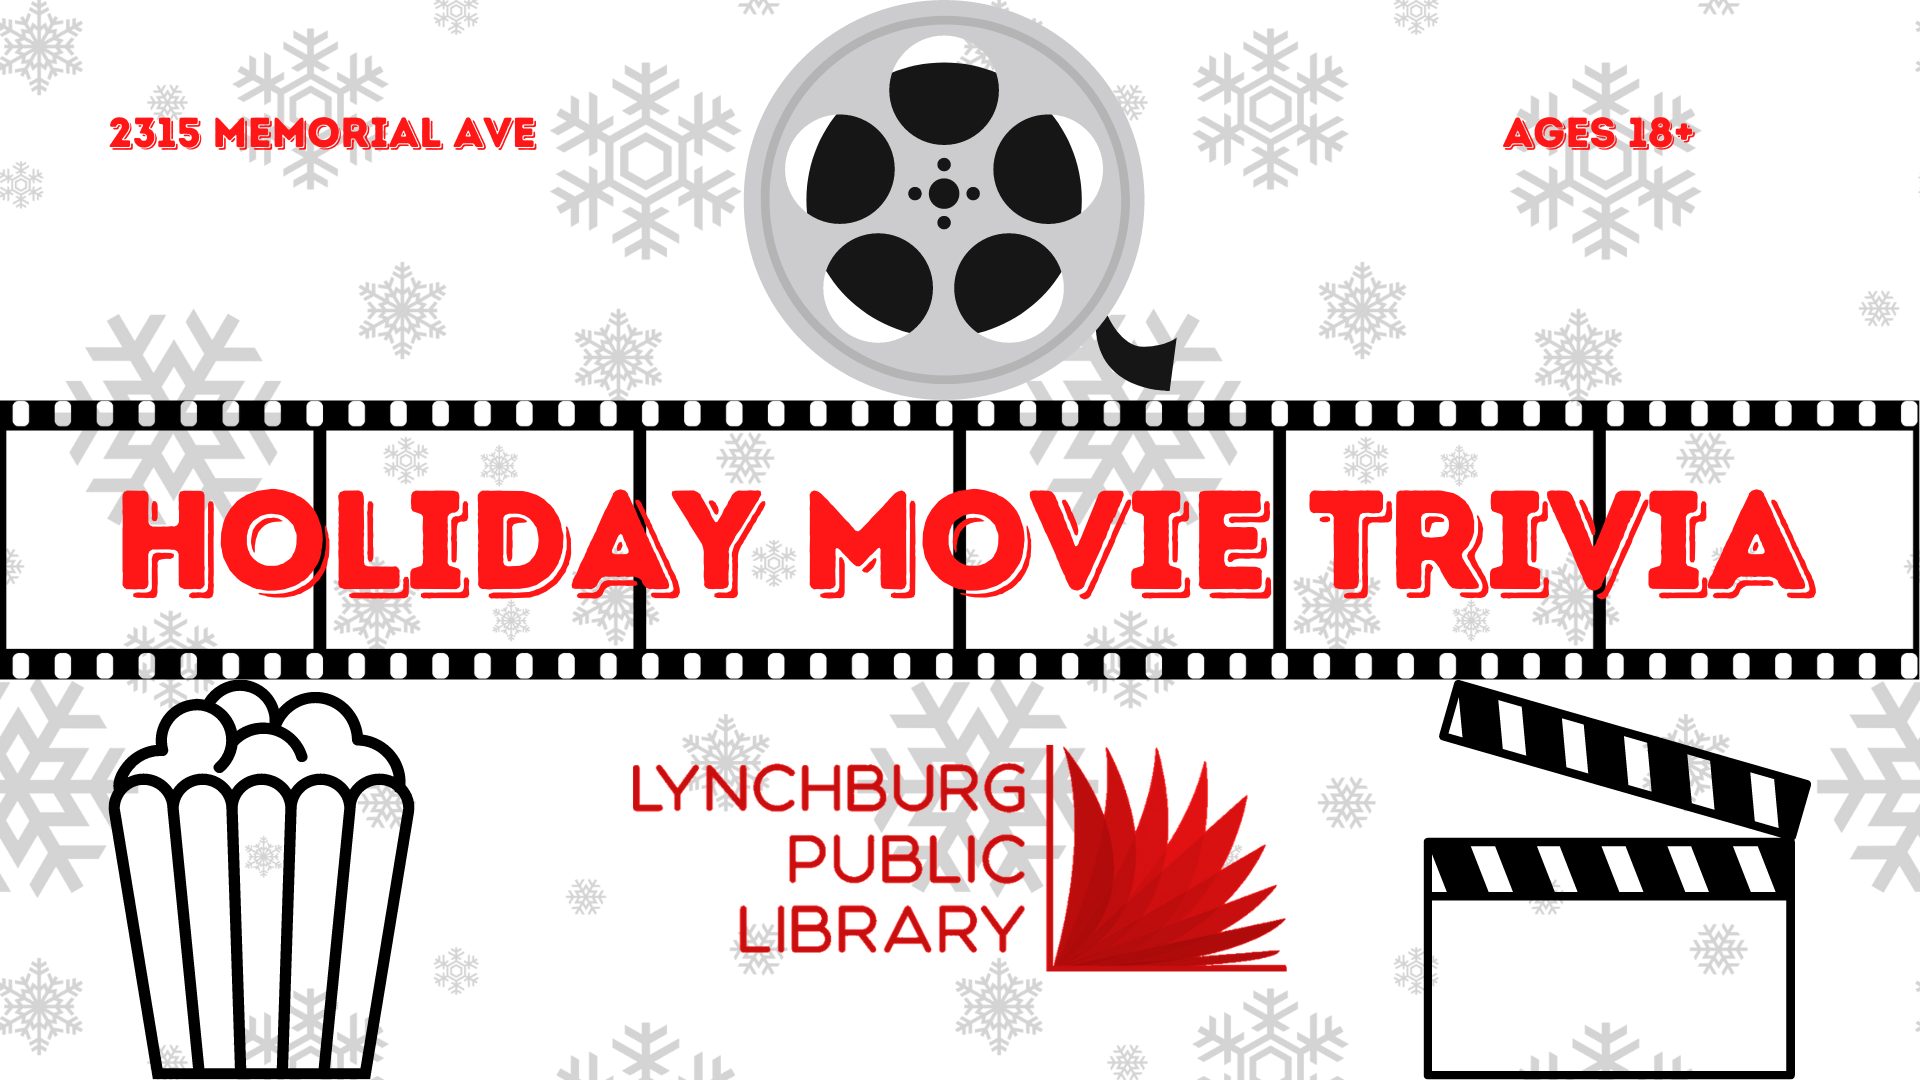 2315 Memorial Ave; Ages 18+; Holiday Movie Trivia; Lynchburg Public Library